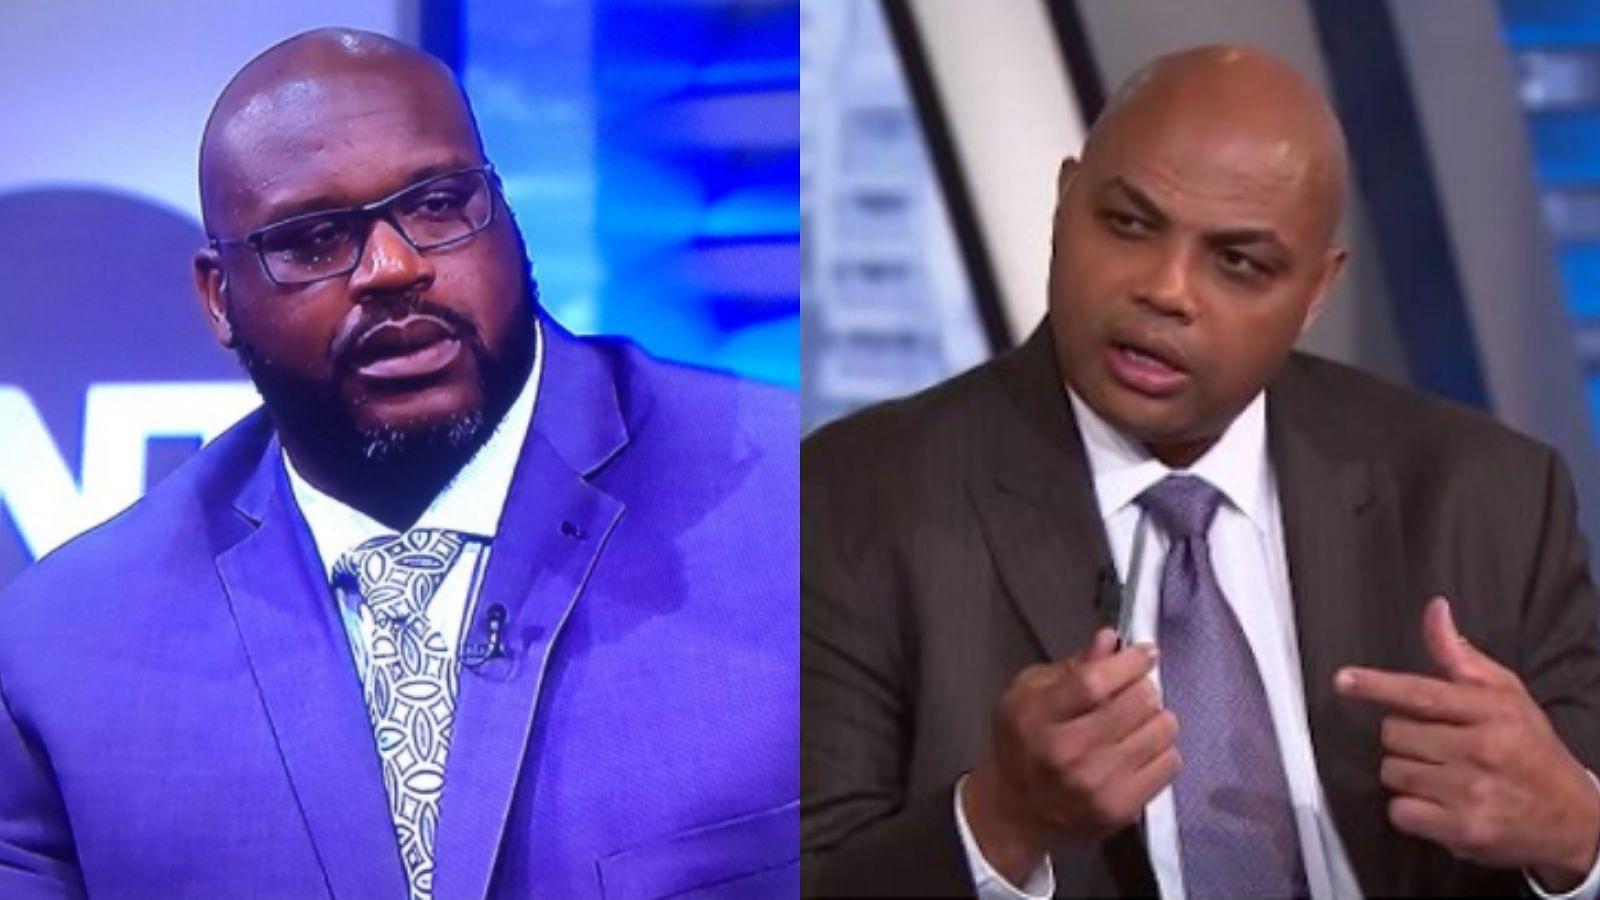 “You can’t turn on the TV without seeing fat a** Shaq everywhere!”: When Charles Barkley was livid at having to see Lakers legend do numerous adverts and endorsements